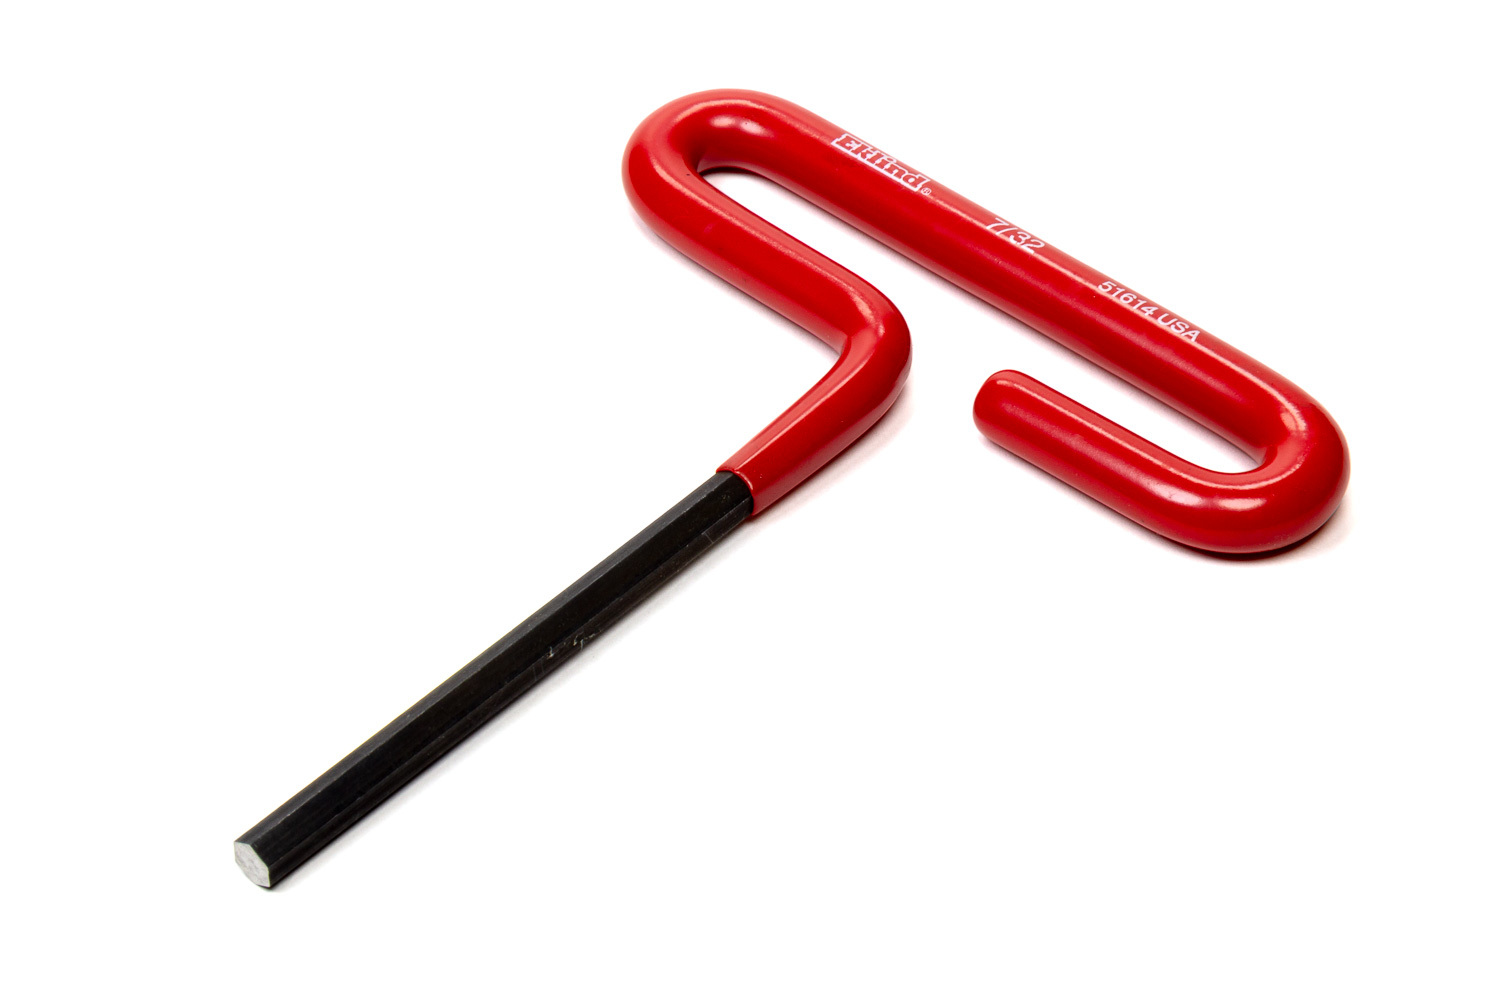 LSM Racing Products 1T-7/32 Allen Wrench, T-Handle, 7/32 in Hex, Plastic / Steel, Black / Red Oxide, Each